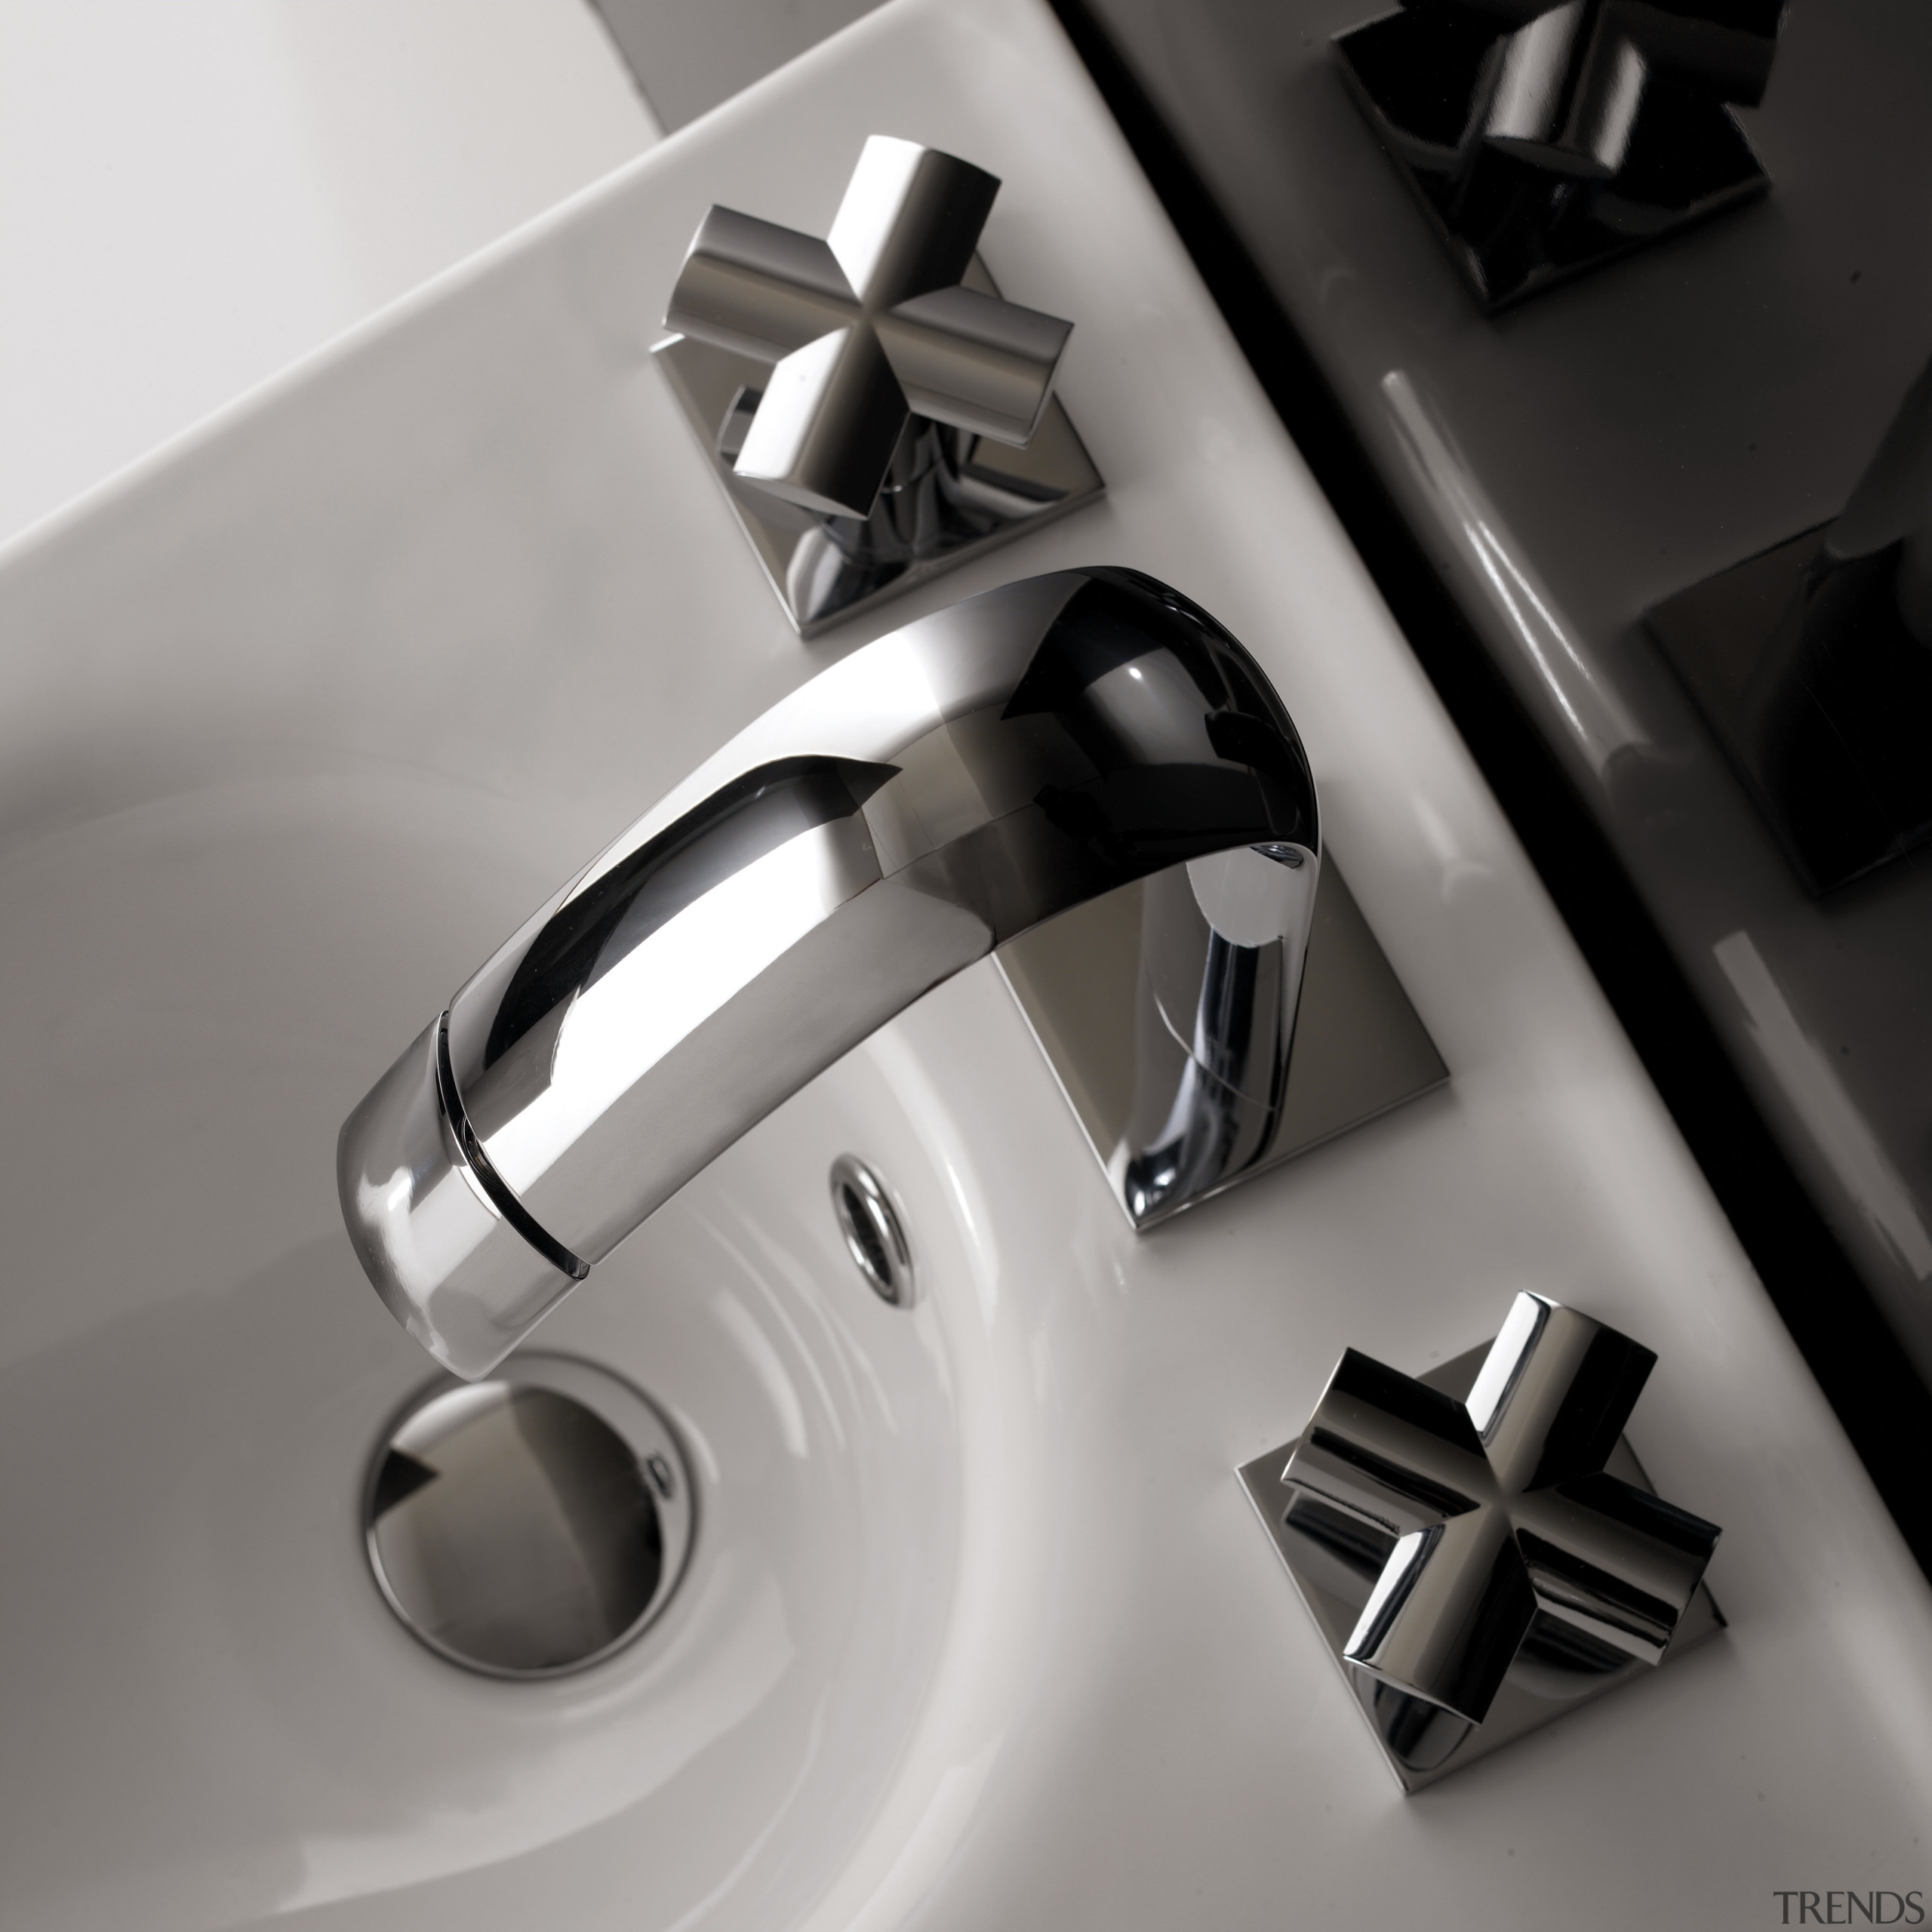 Italian-designed bathroomware, including the Noox series from Zazzeri angle, automotive design, hardware, plumbing fixture, product design, tap, gray, black